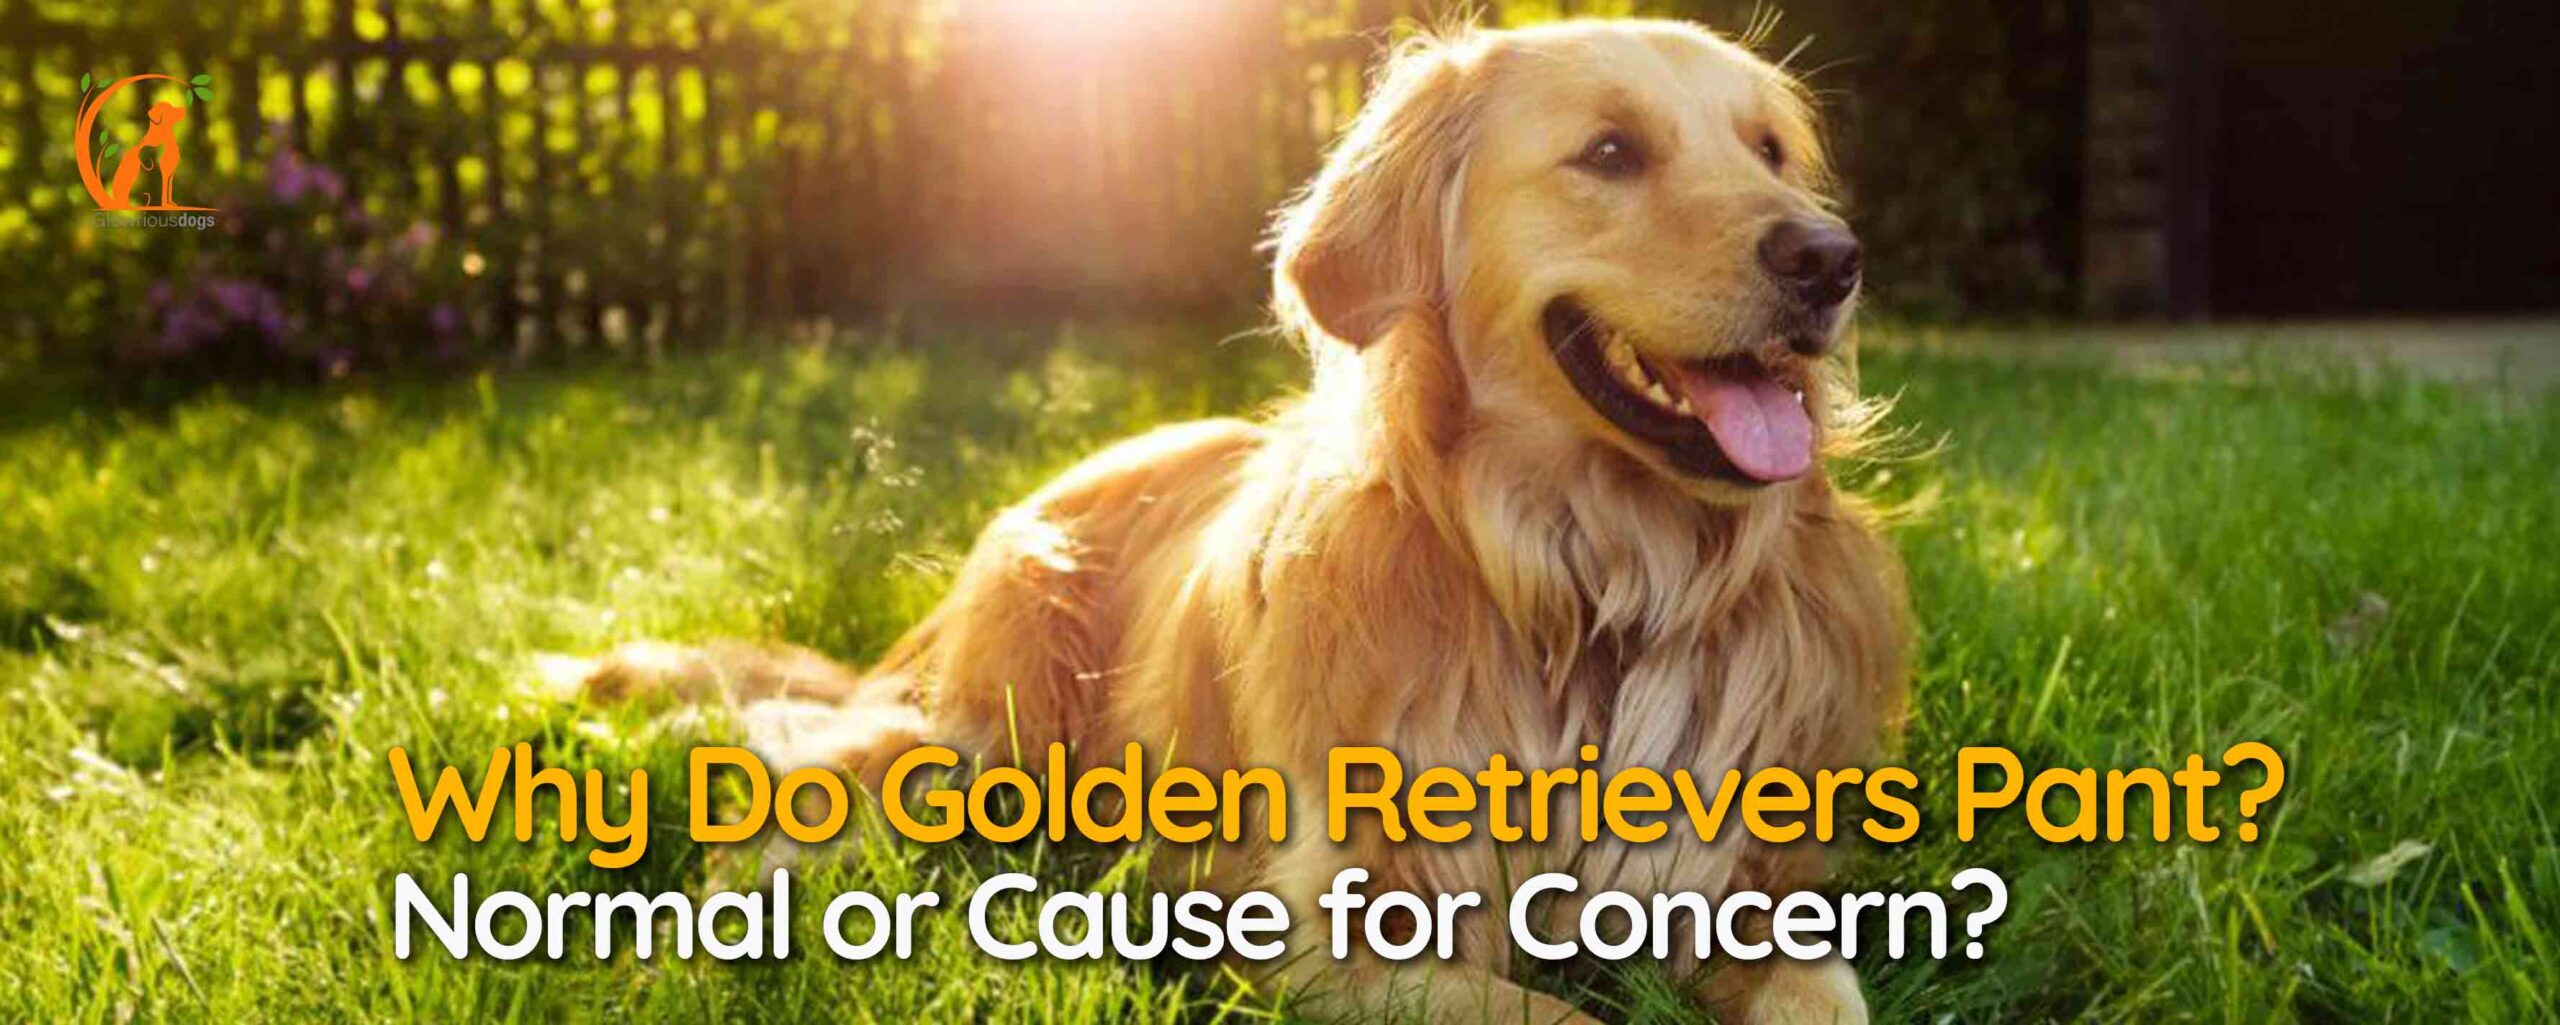 Why Do Golden Retrievers Pant? Normal or Cause for Concern?